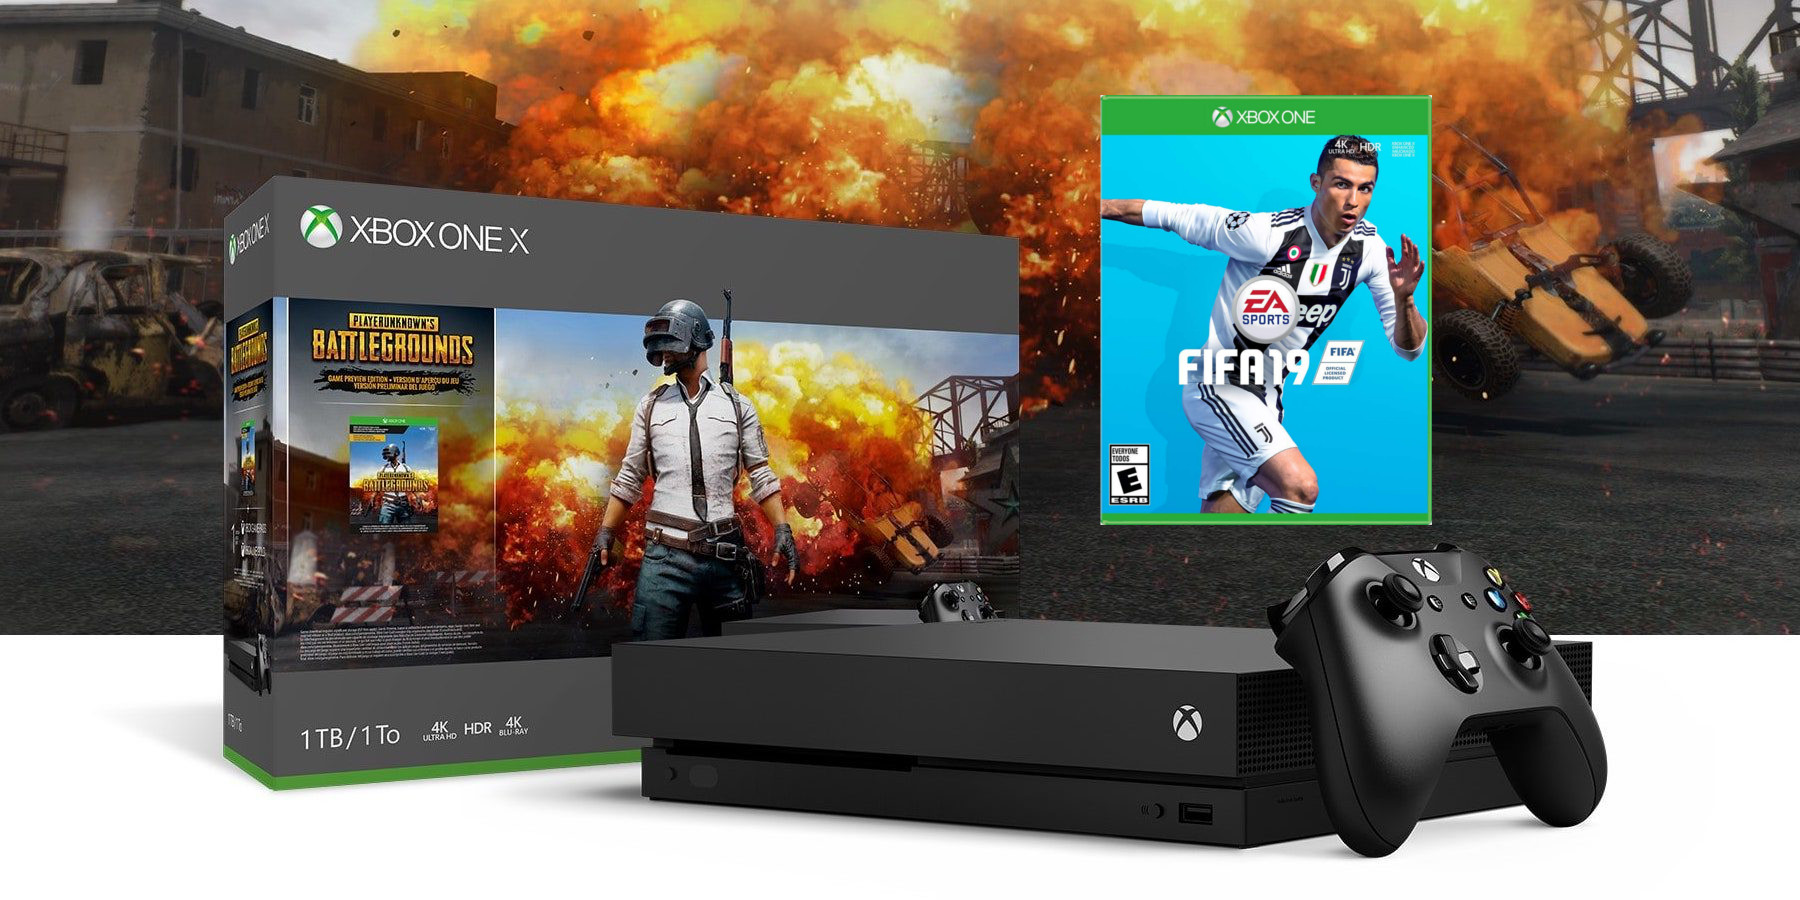 Promotie Betasten Wedstrijd Get FIFA 19 for free inside this Xbox One X 1TB PUBG Bundle for $500 shipped